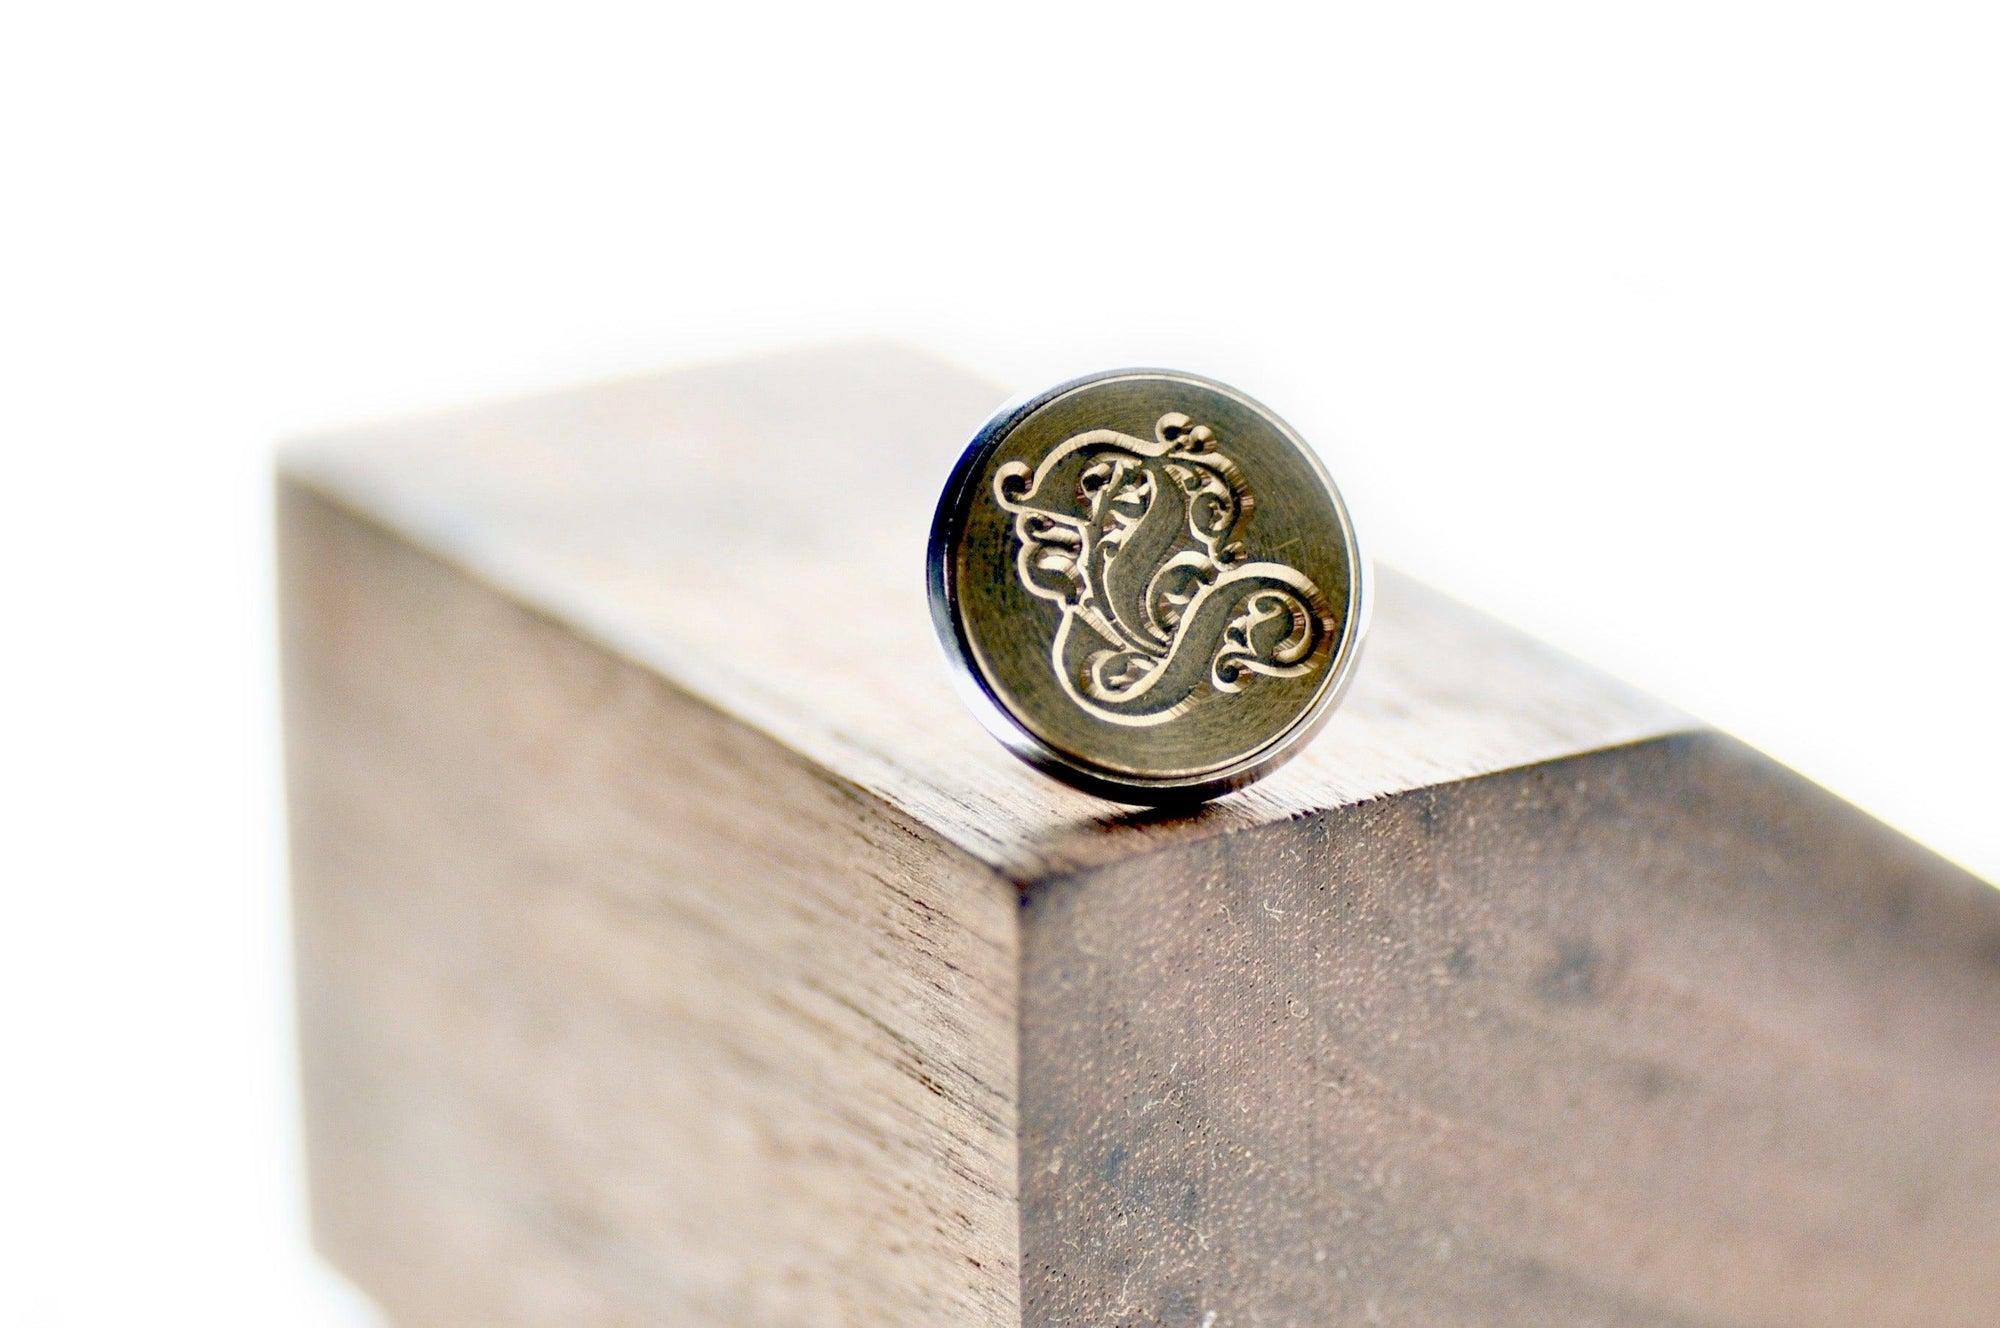 Gothic Initial Signet Pin - Backtozero B20 - 1 initial, 10mm, 12mm, 14mm, 1initial, badge, brass, brooch, Custom, him, initial, monogram, One Initial, Personalized, pin, signet, stainless steel, Wedding